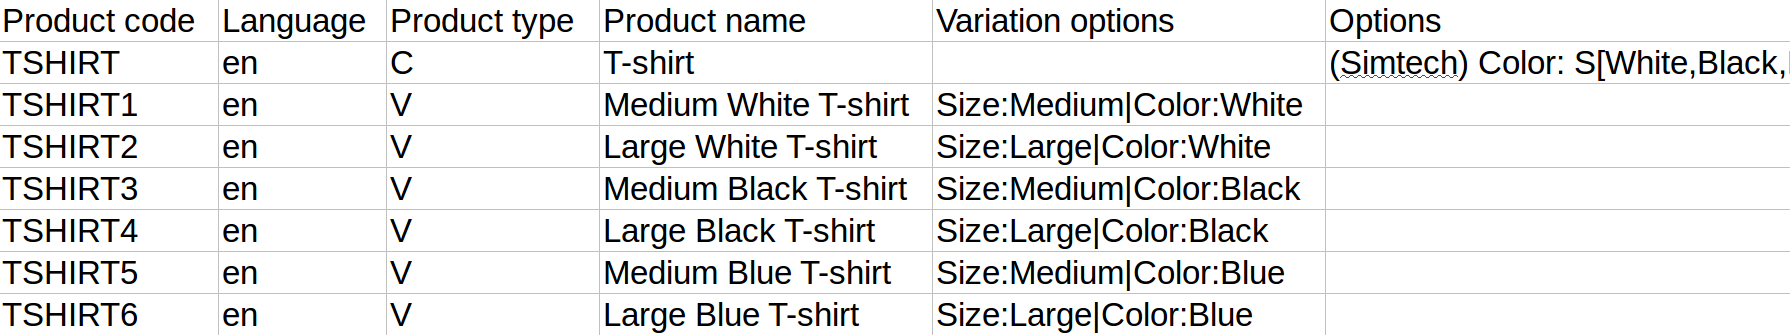 Product variations in an imported CSV file.